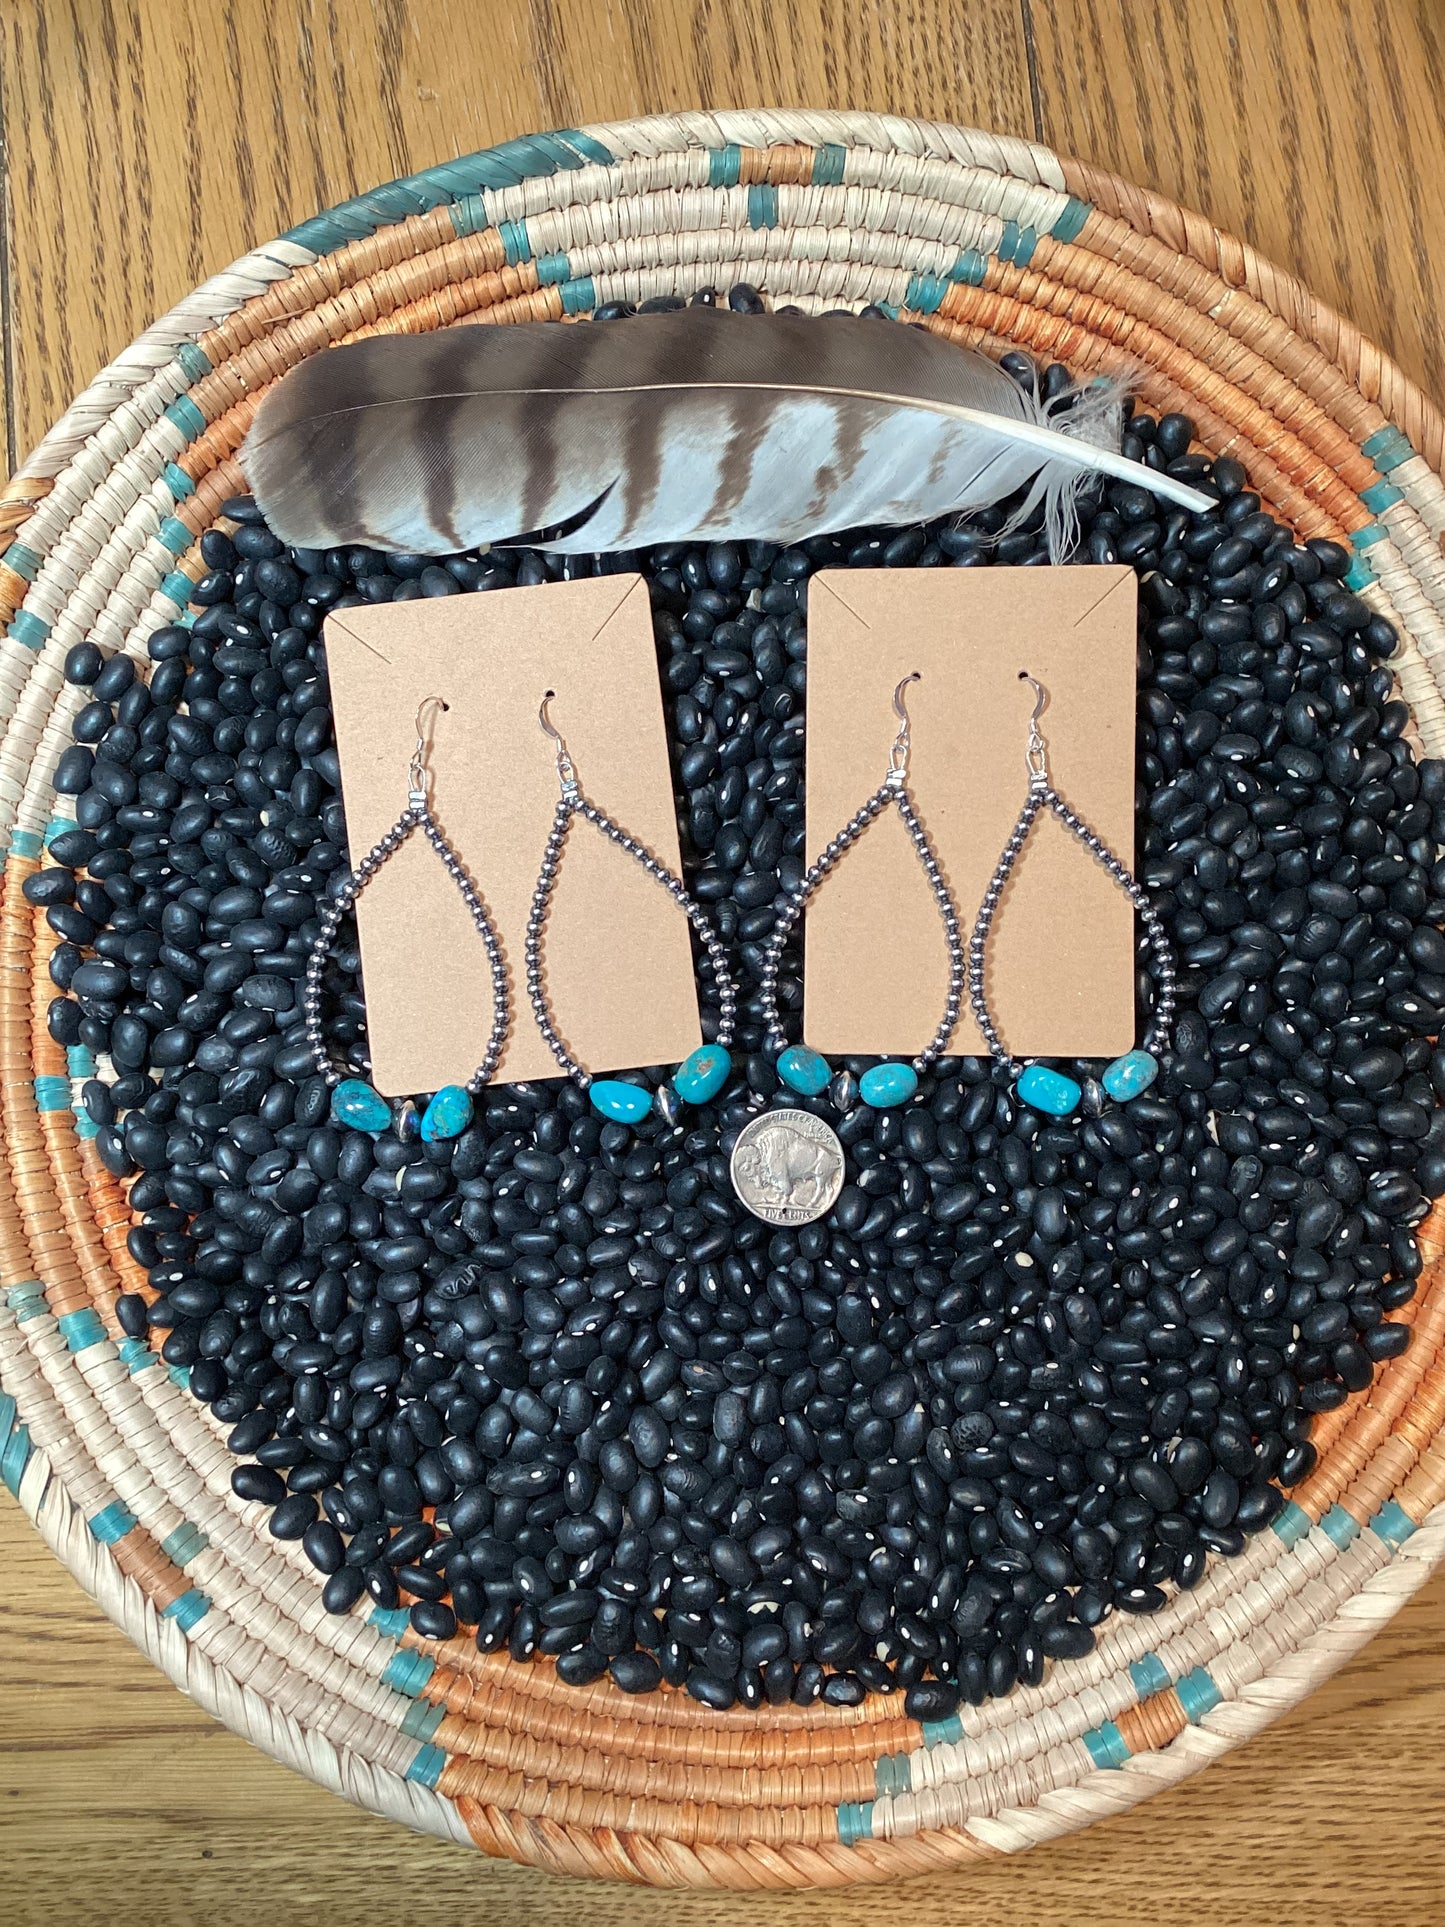 Pure Bliss Earrings- Blue turquoise